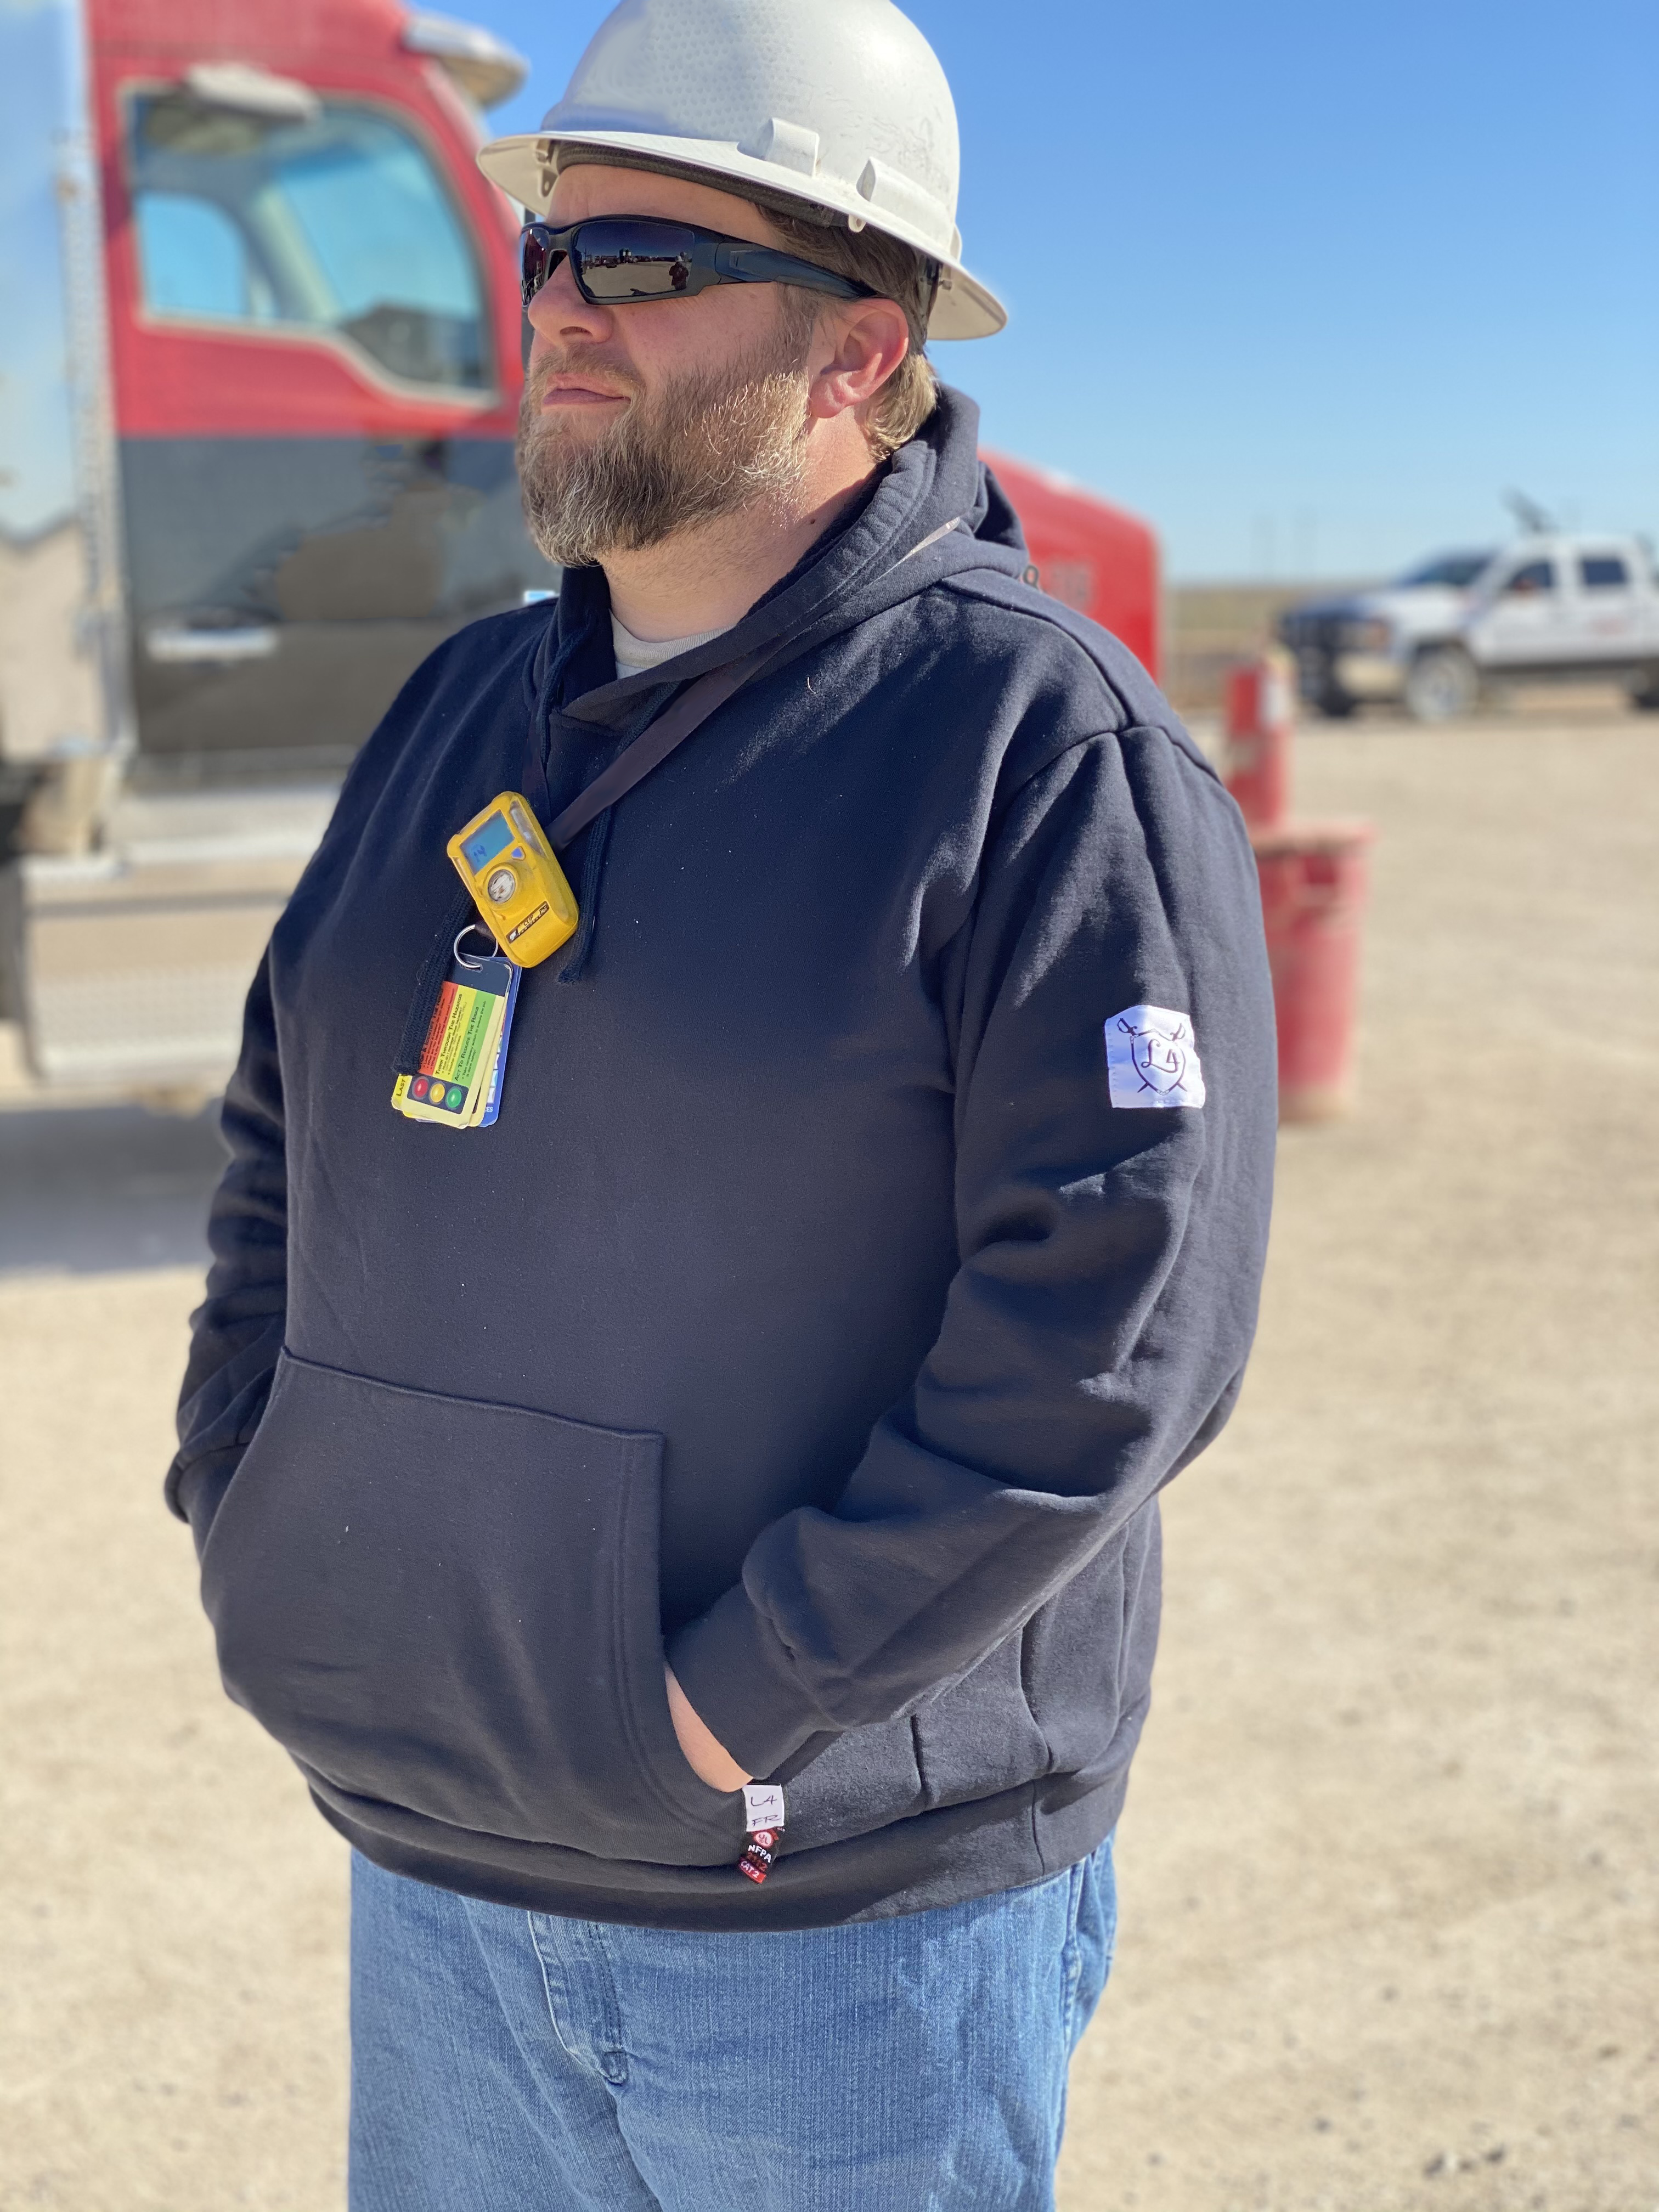 Why FR Sweatshirts are the Safer Choice for Winter Work